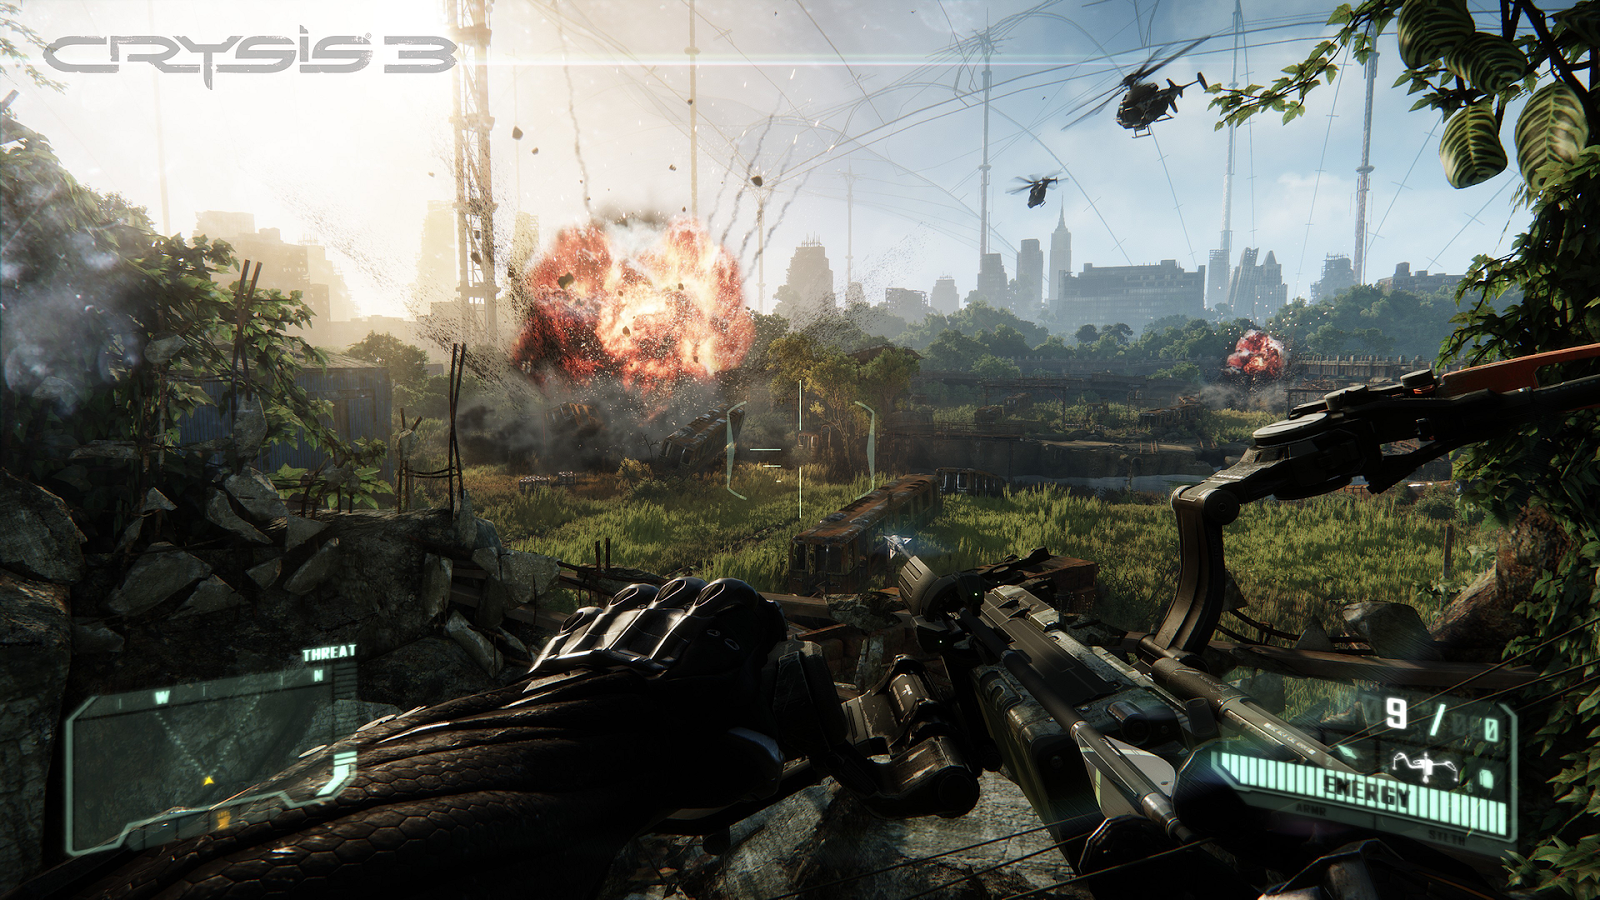 download crysis 3 patch 1.4